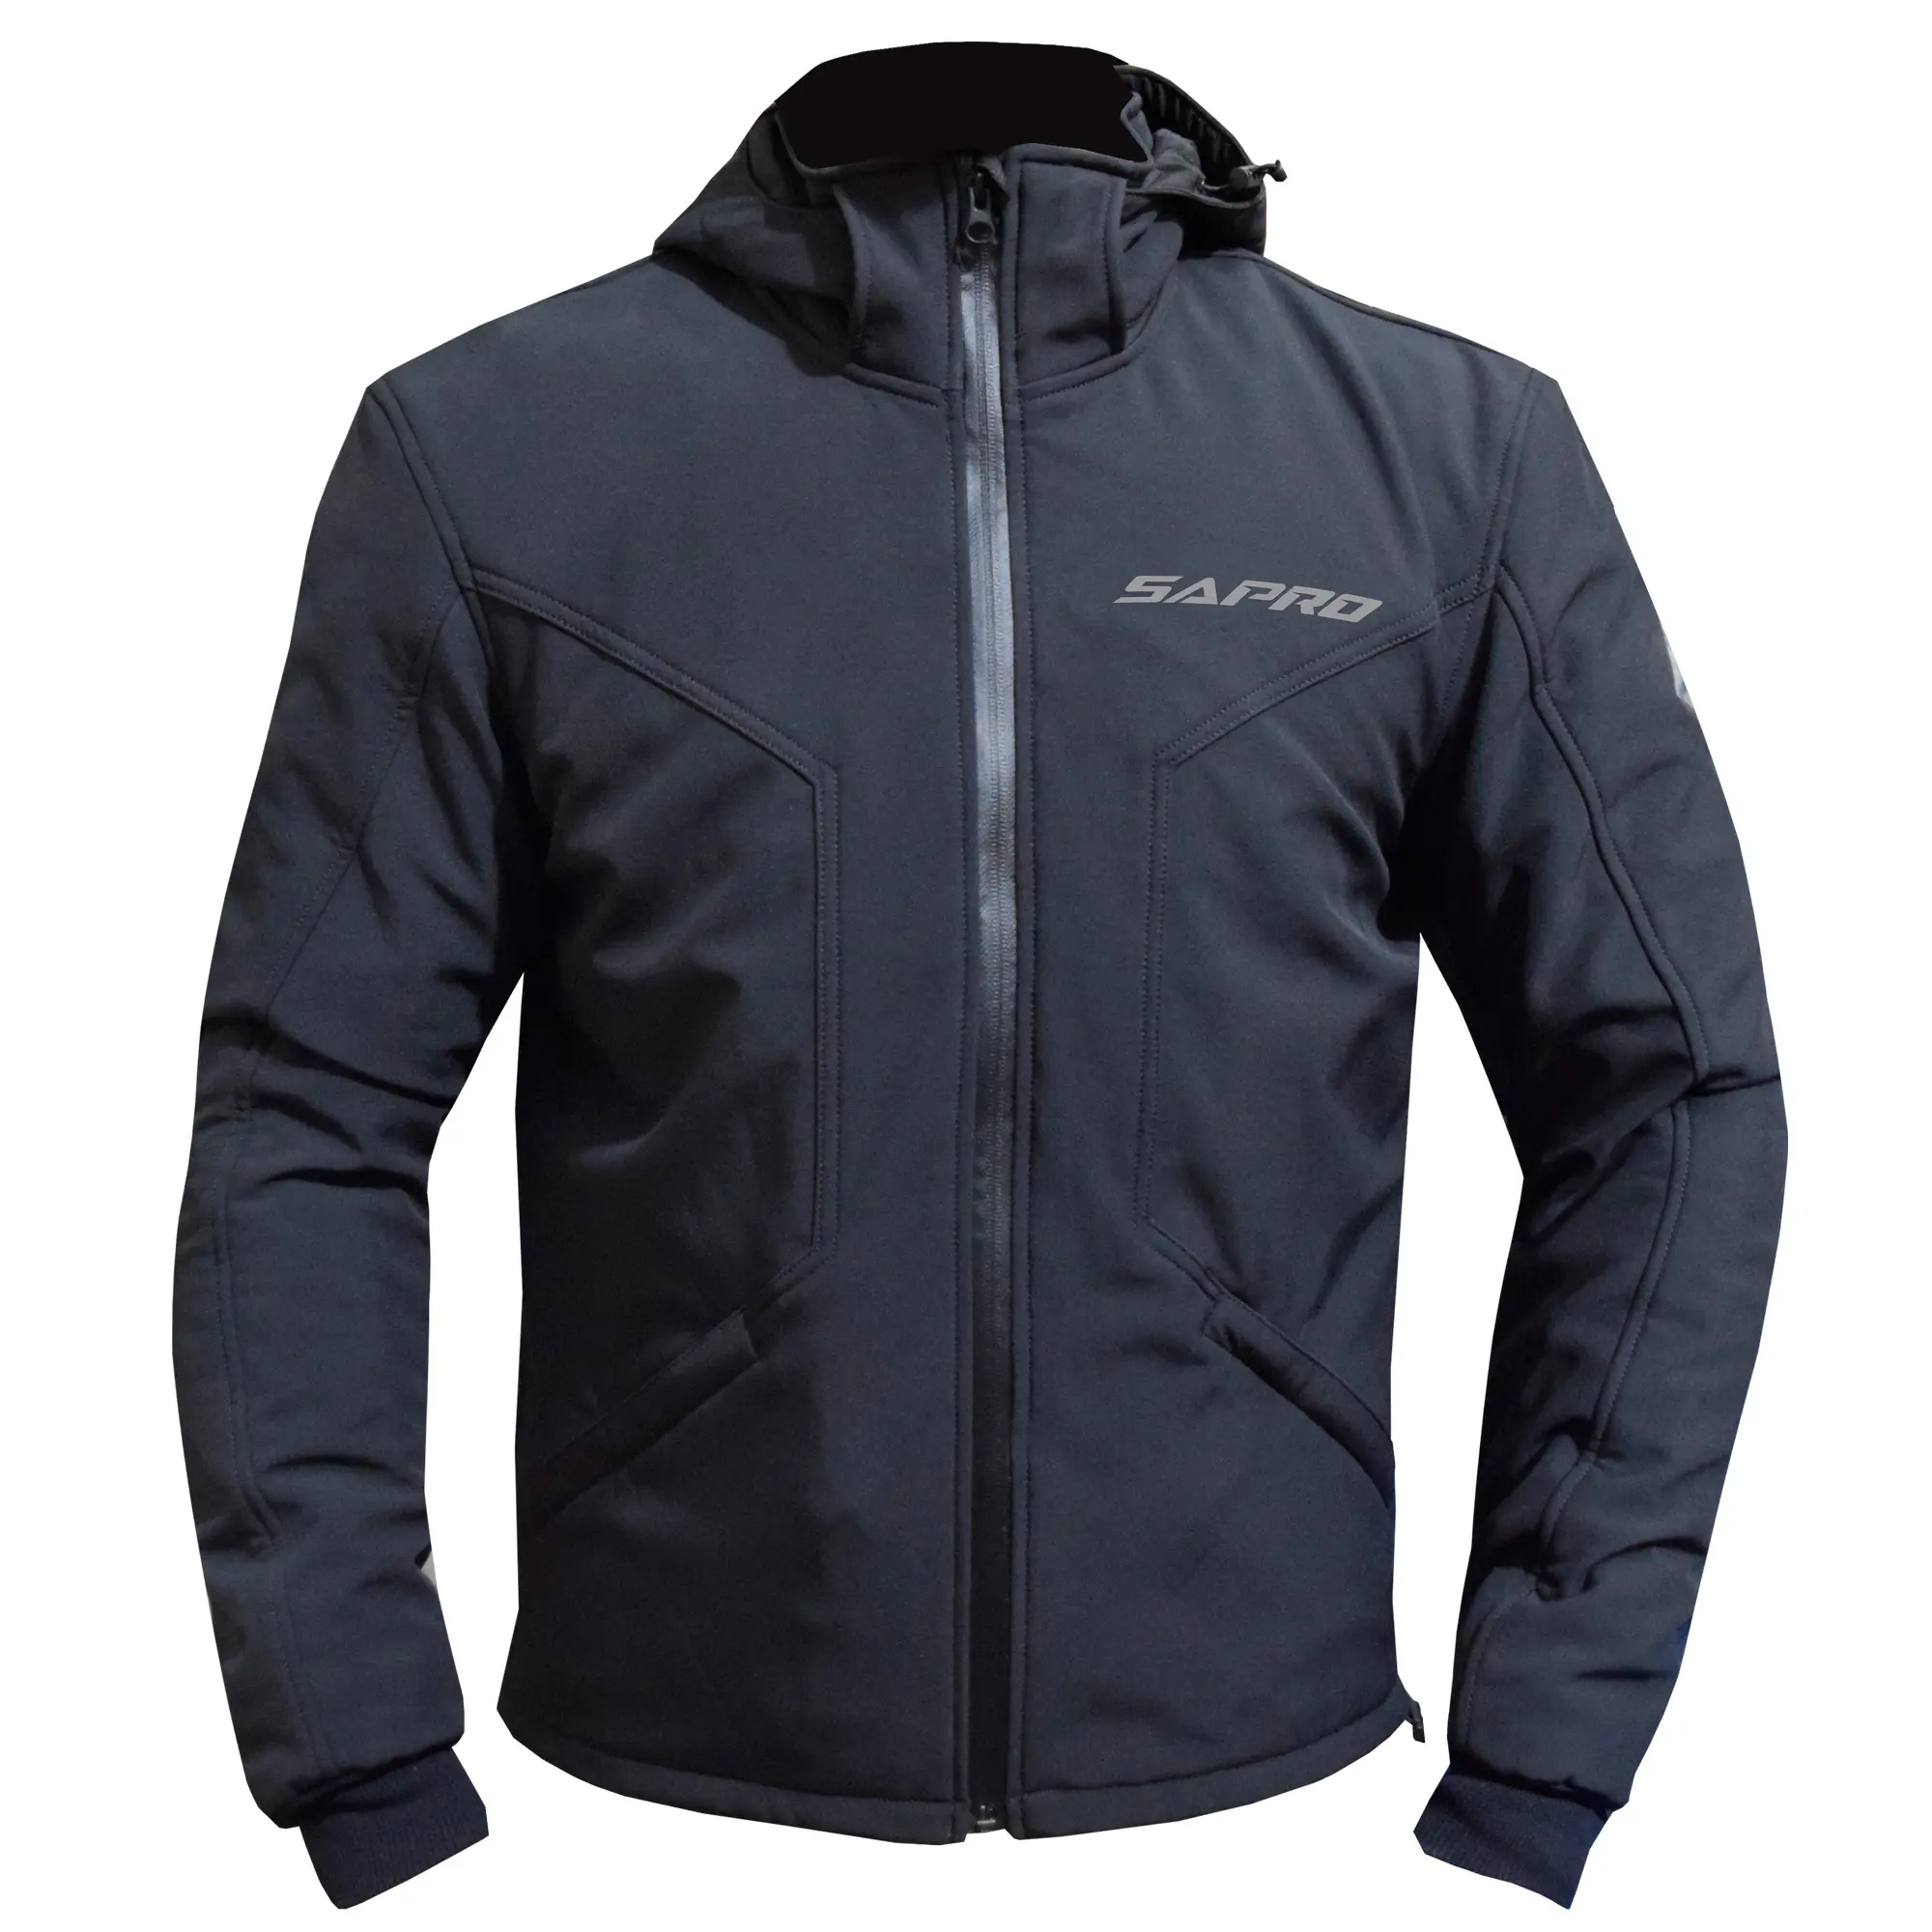 High quality Sublimation Motorcycle jacket made of Softshell fabric water proof and breathable